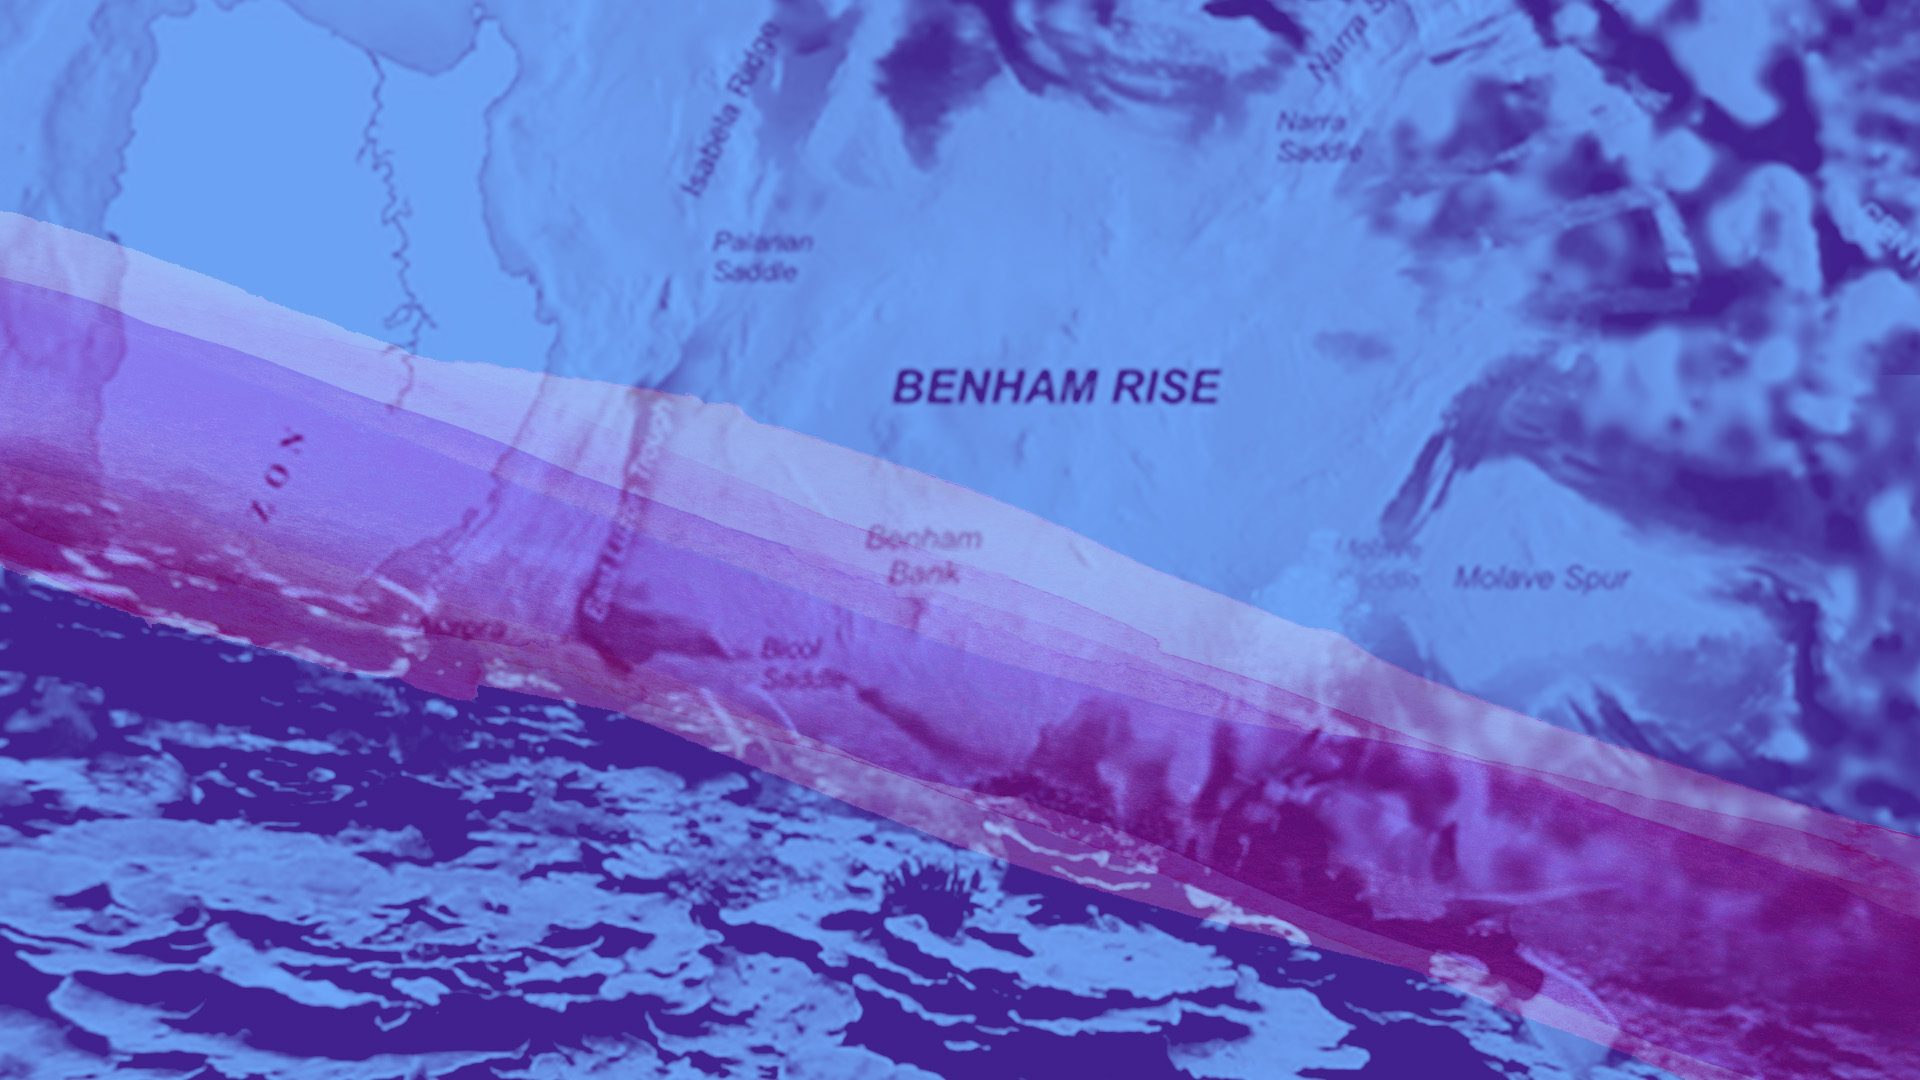 [ANALYSIS] Benham Rise and the value of scientific research